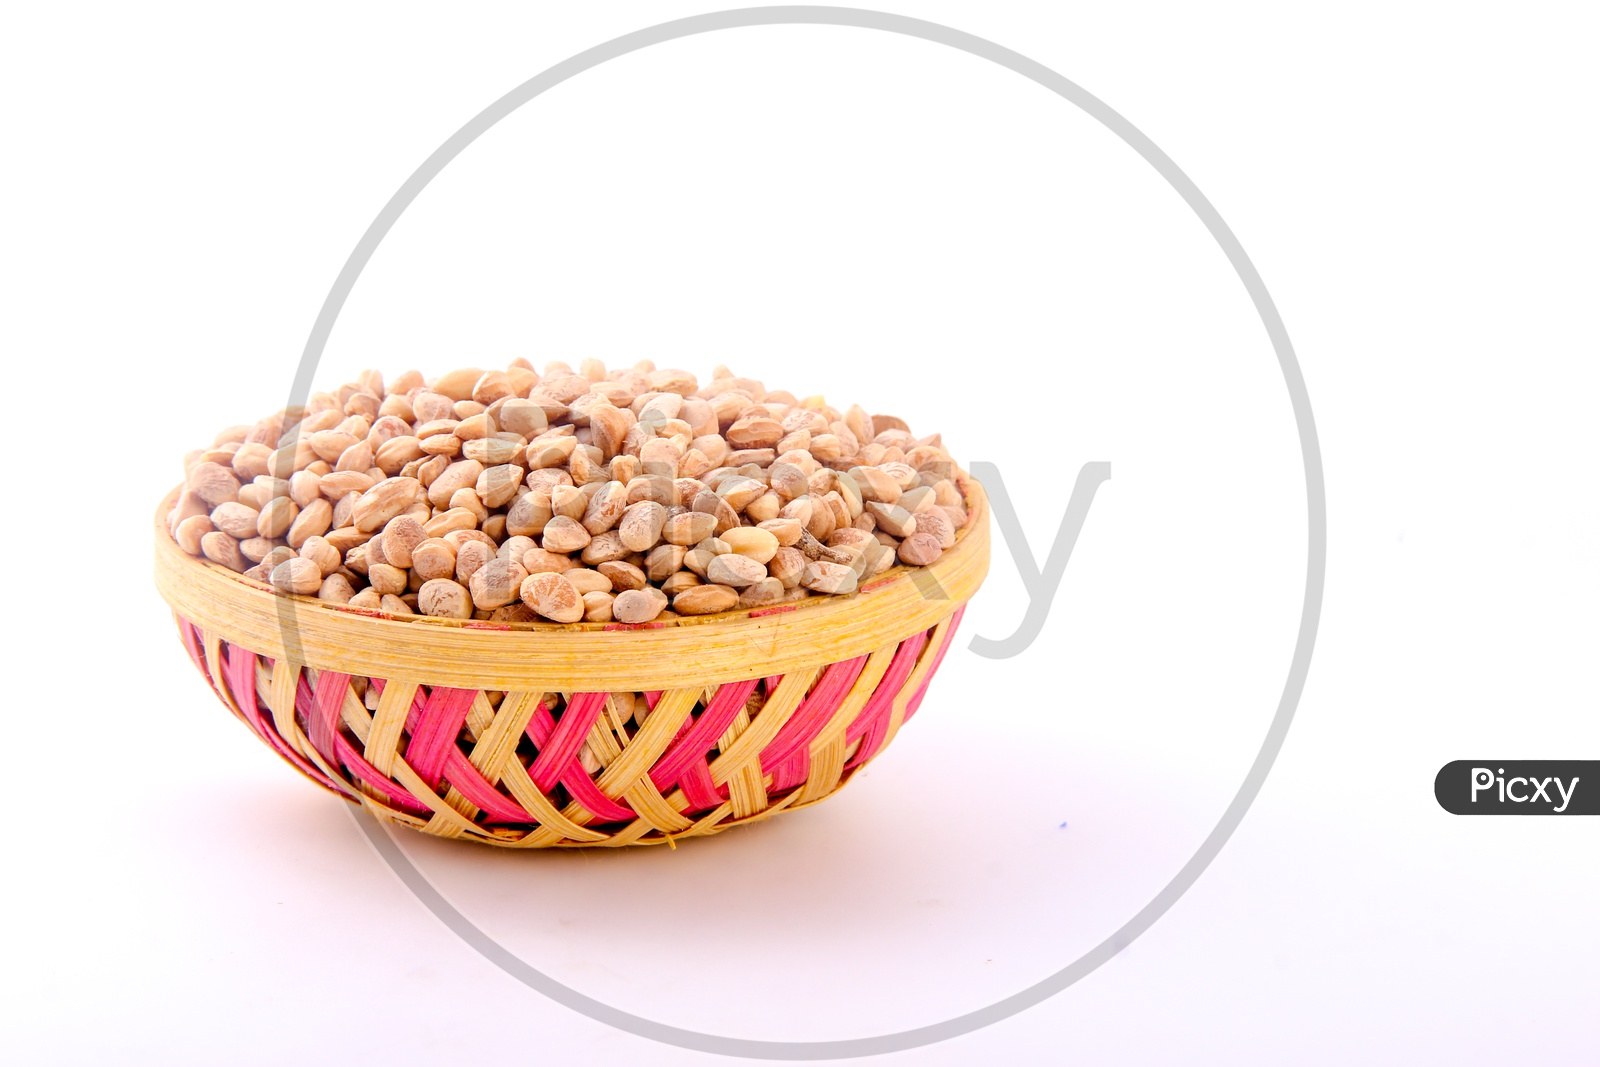 Pista / Pistachio in a Bowl on an Isolated White Back Ground